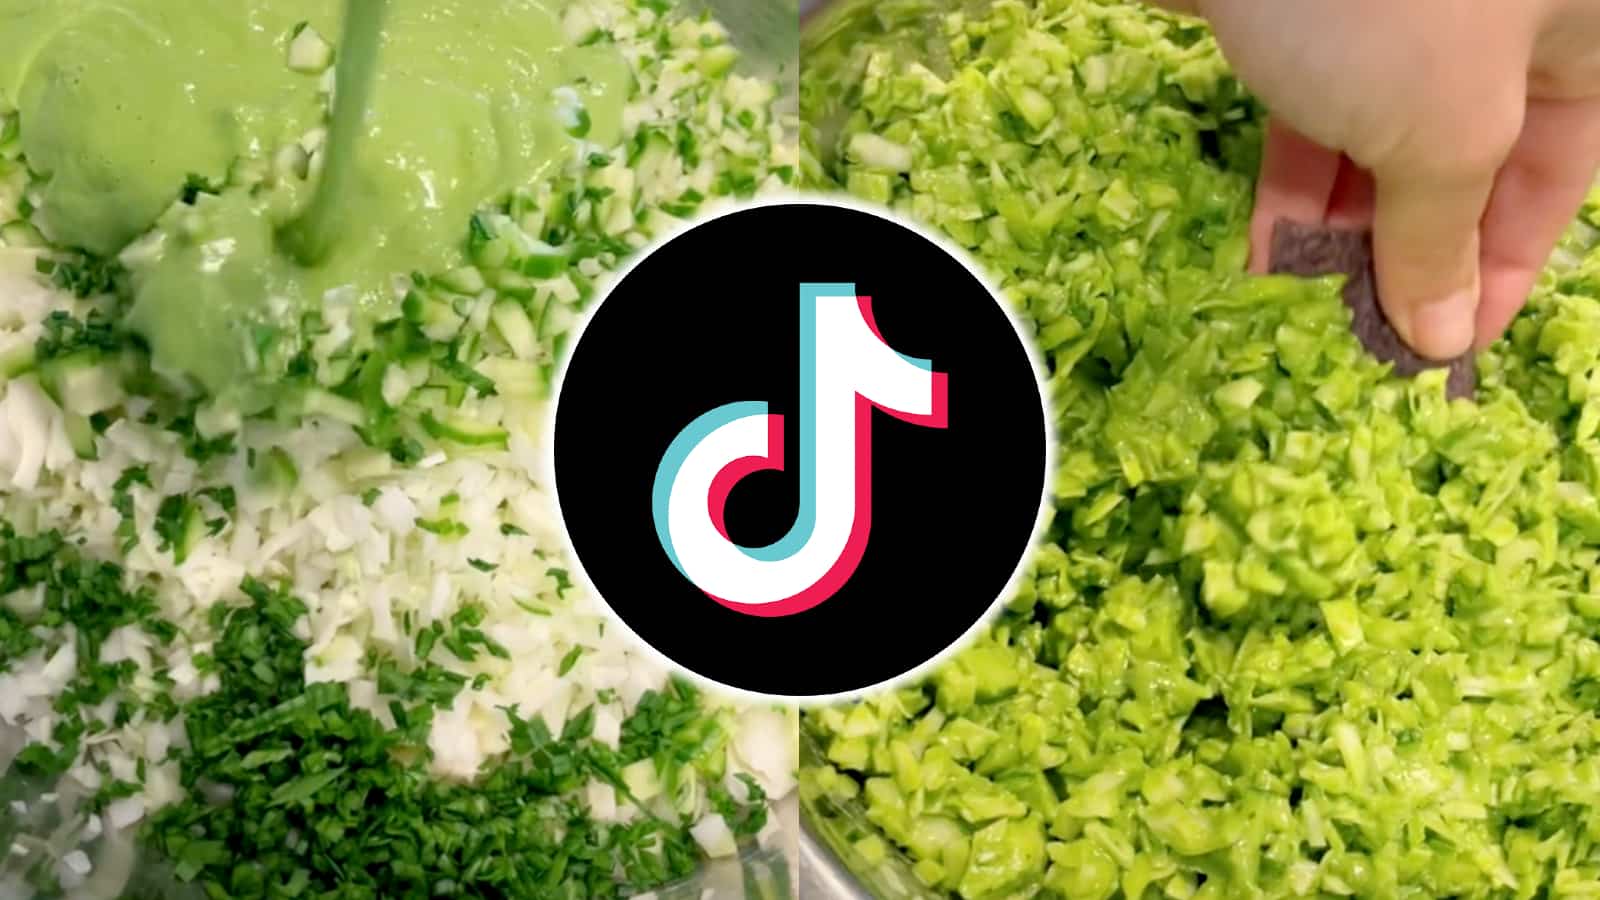 TikTok logo in the middle of a salad